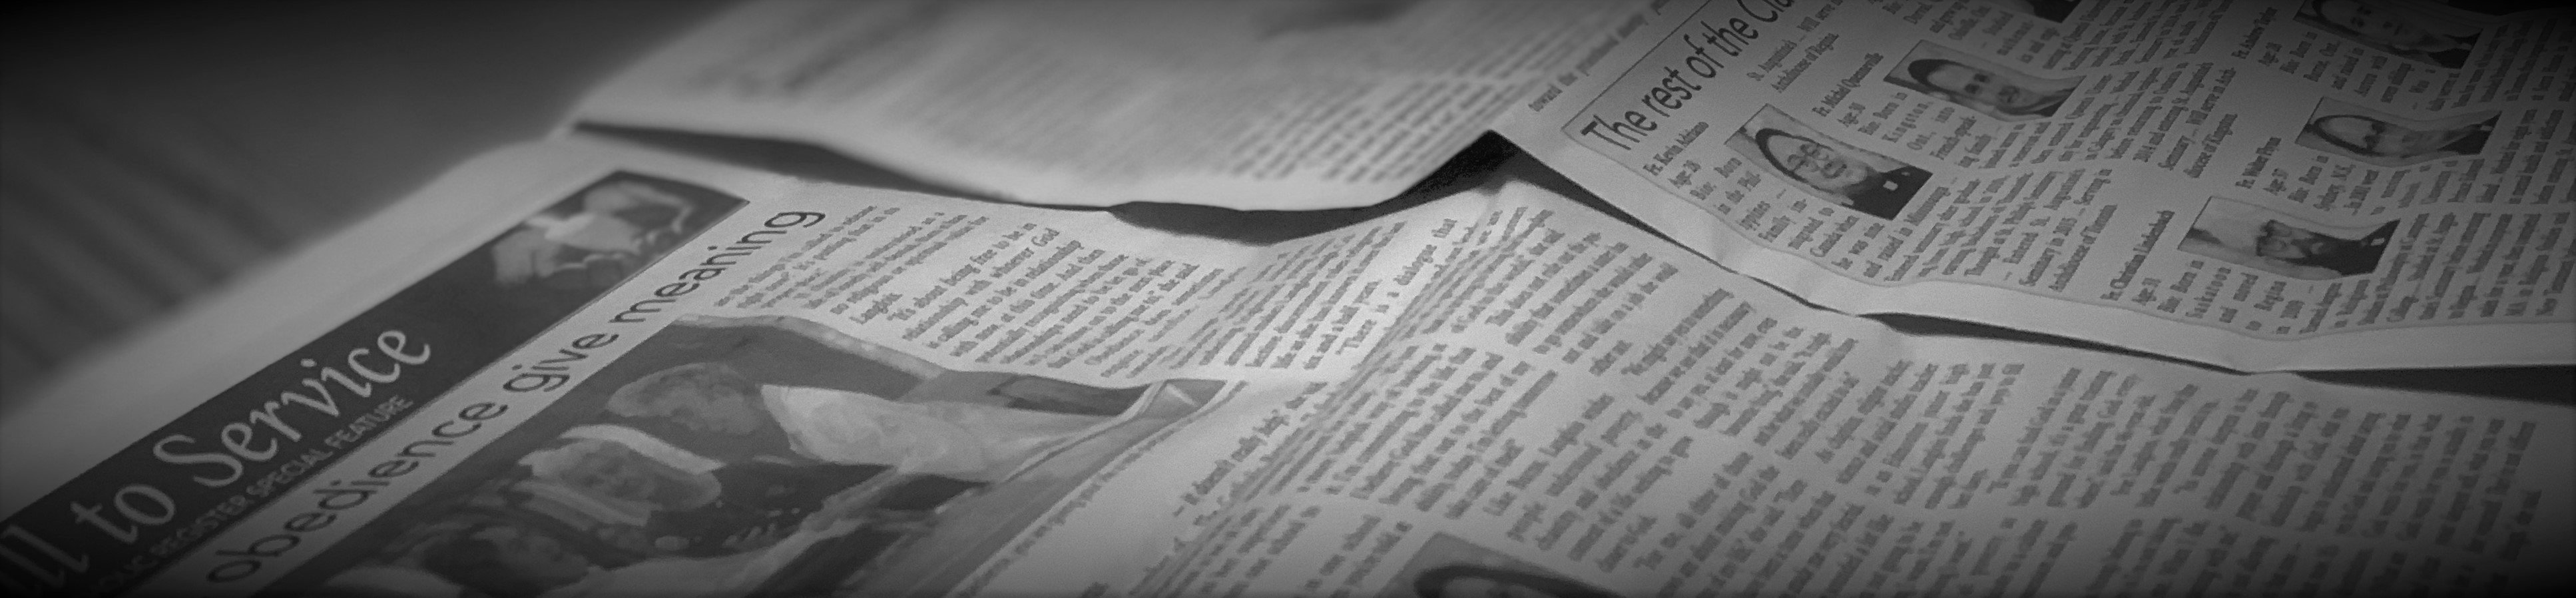 A black and white image of an open newspaper